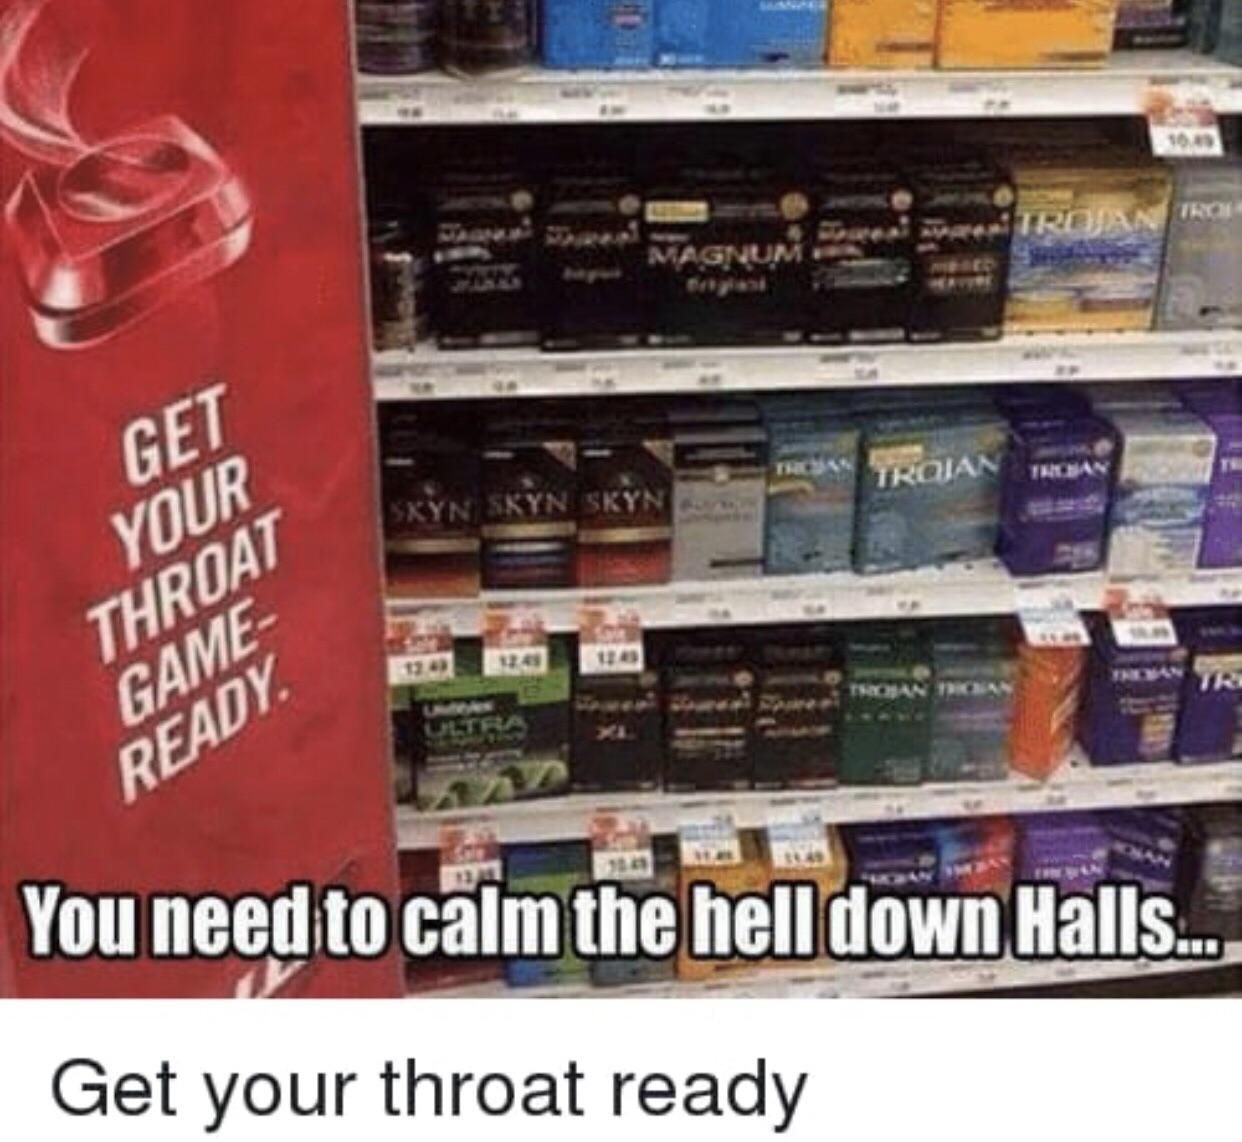 Is your throat ready?